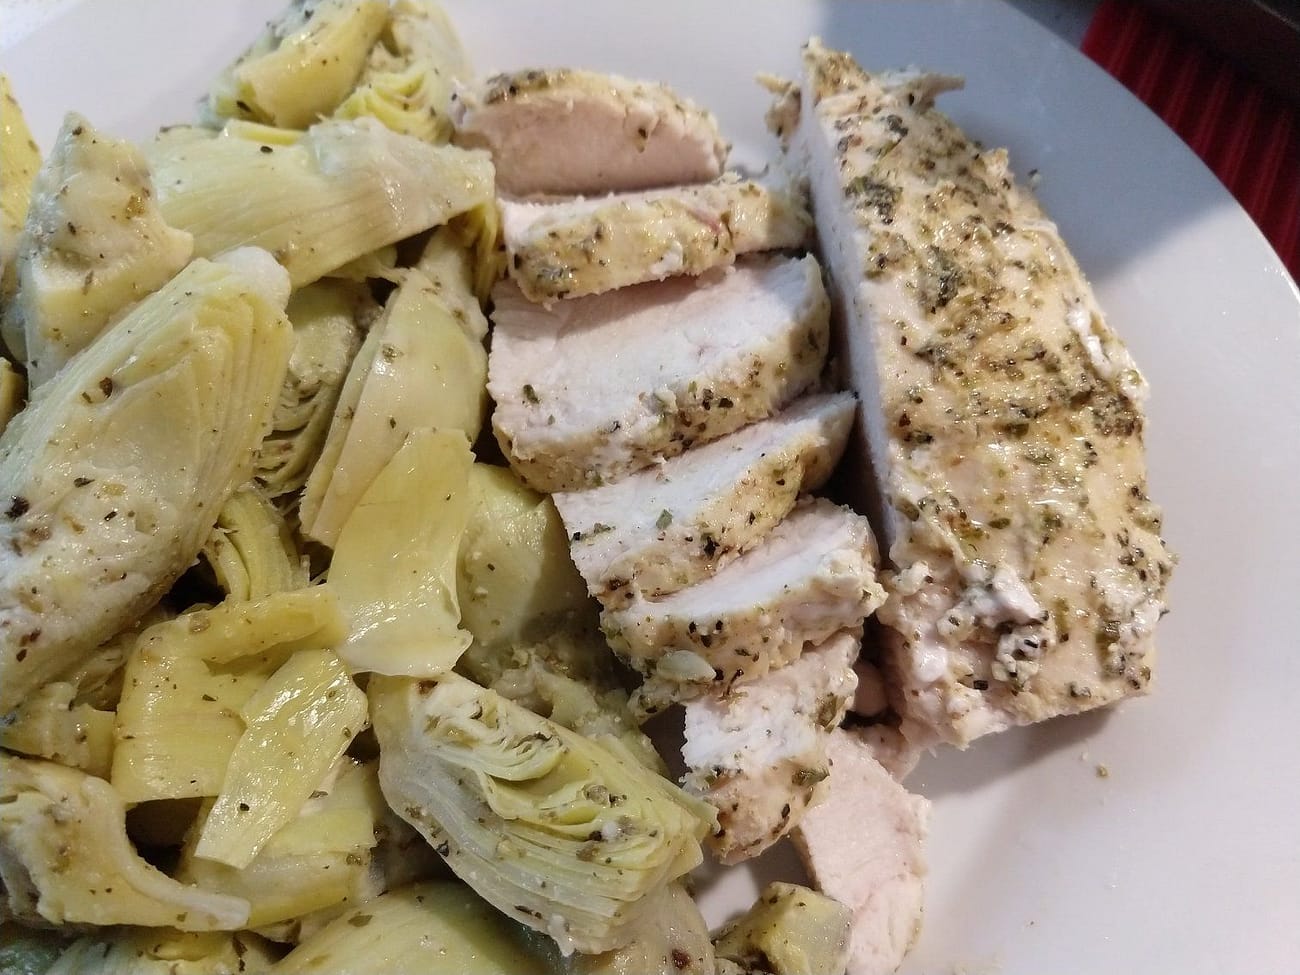 Marinated Chicken with Artichoke hearts in a Lemon Pepper sauce